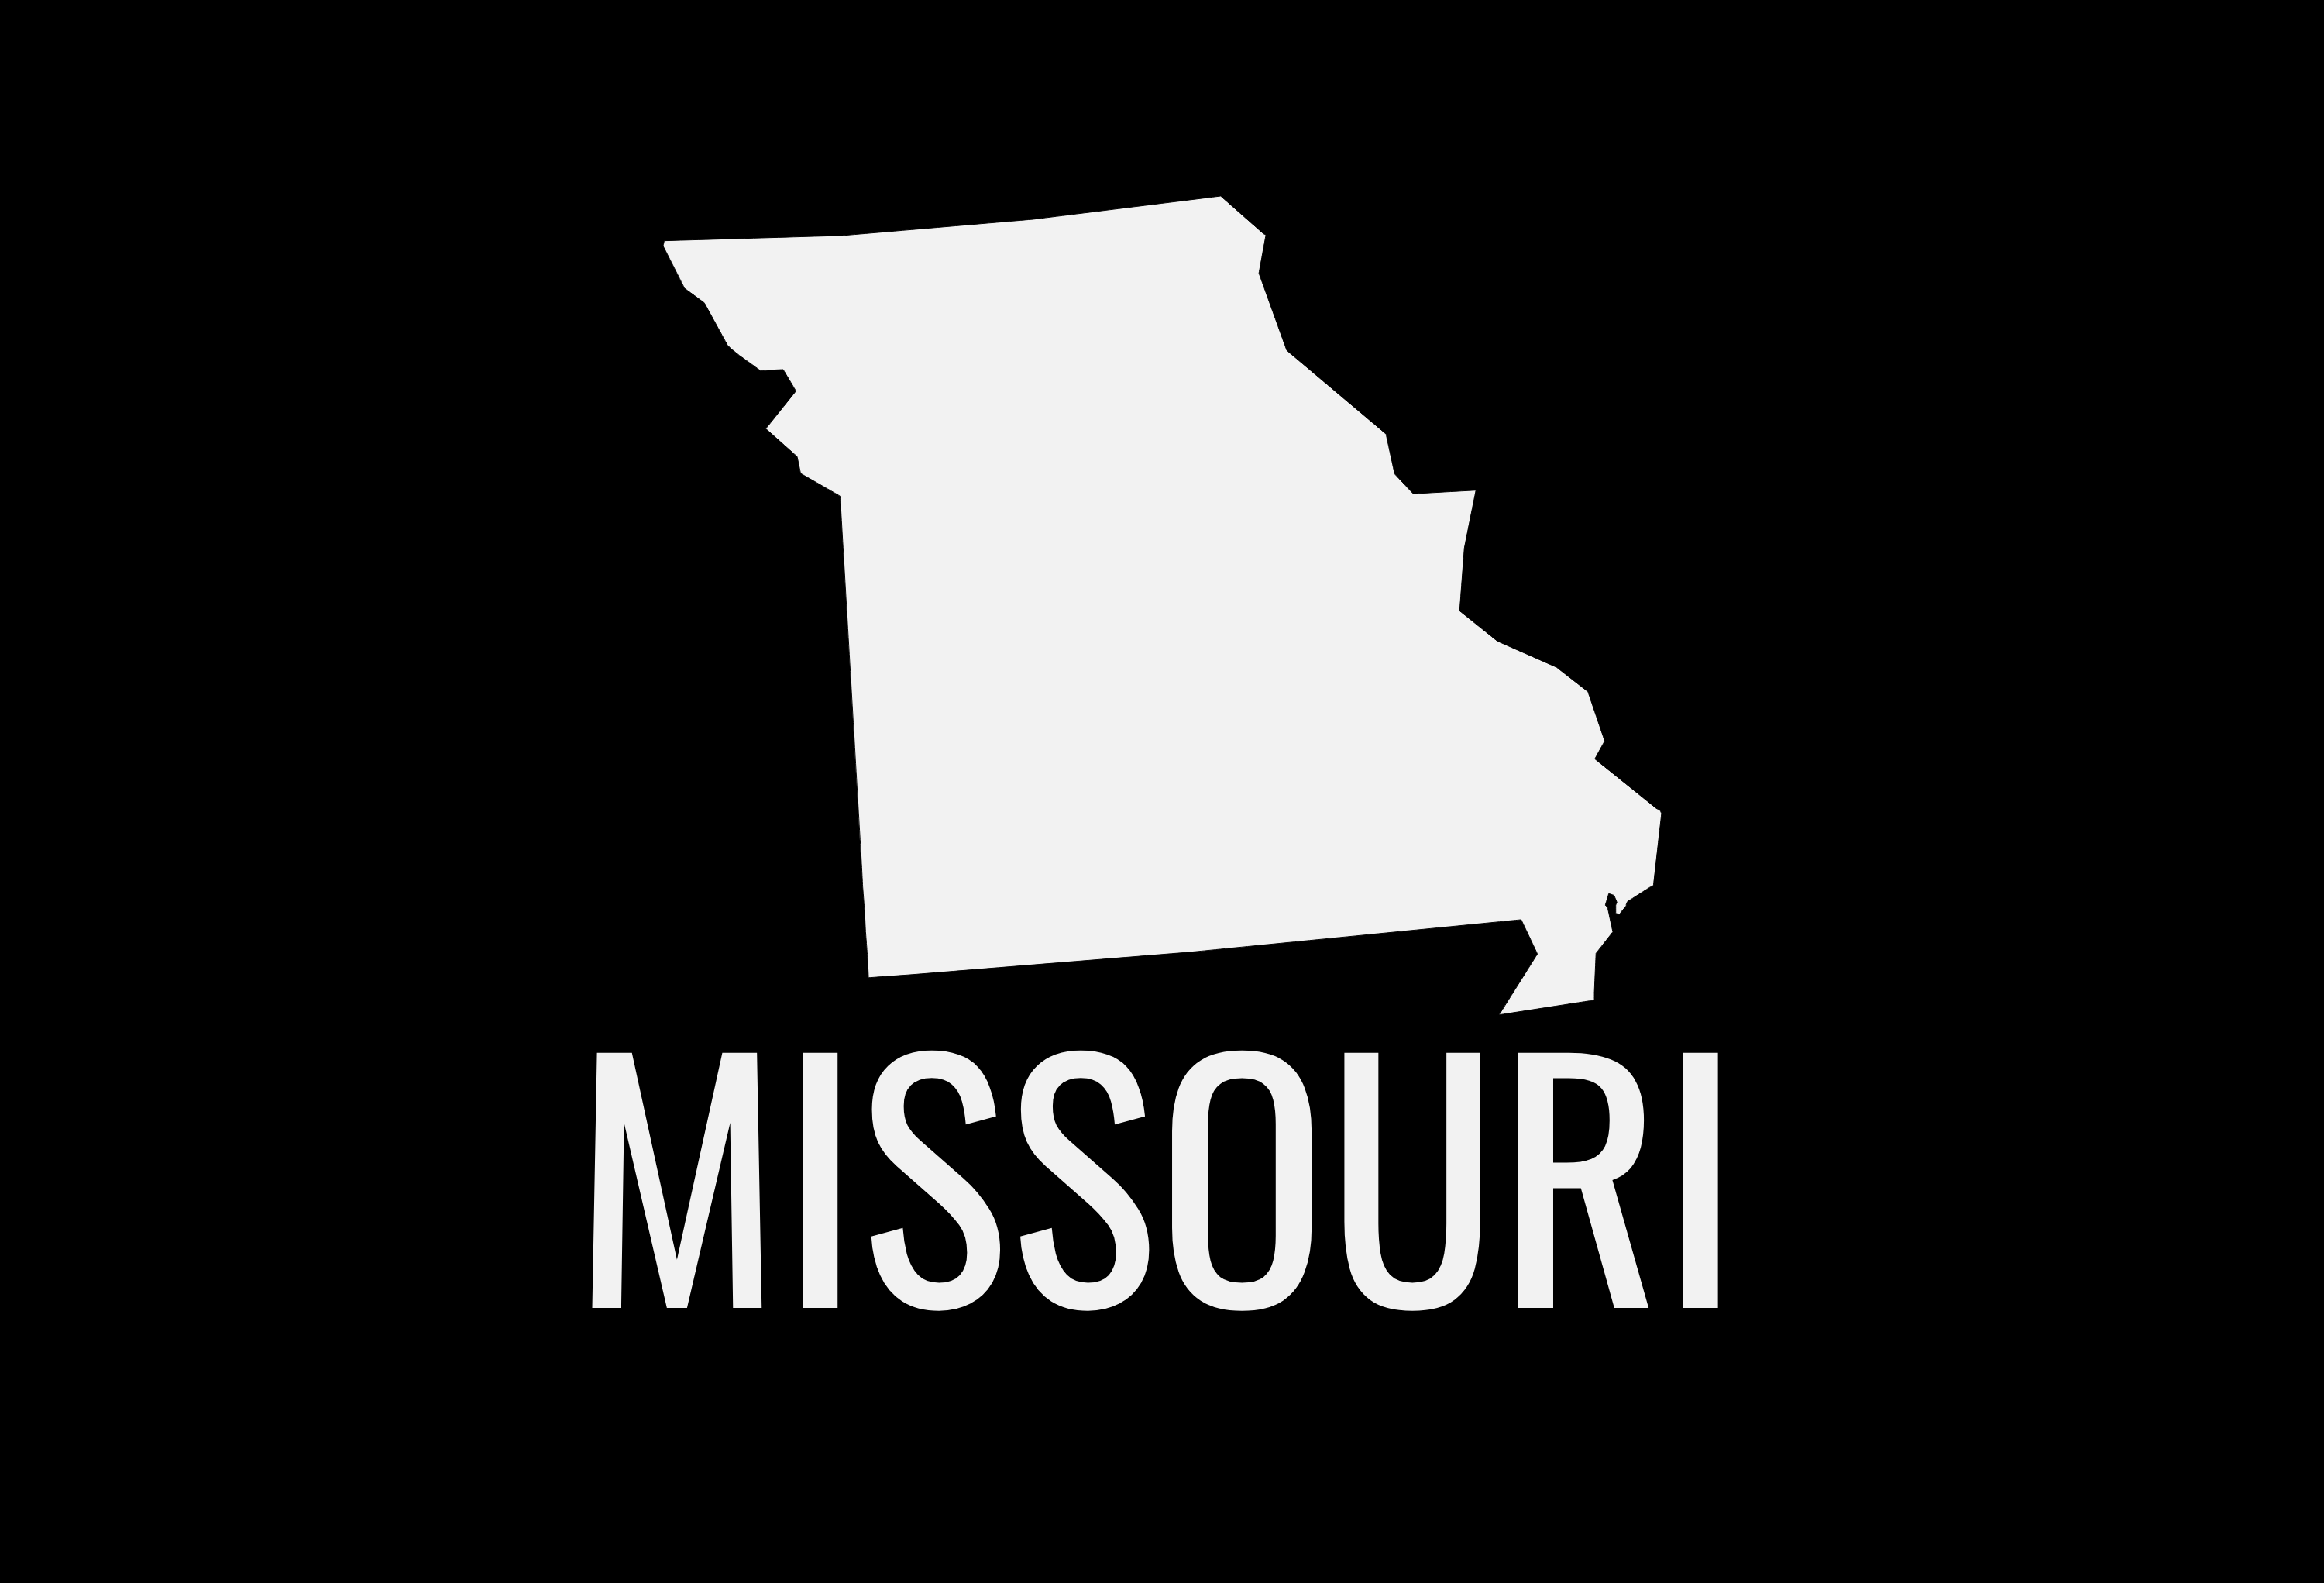 Missouri State Map Car Decal - Permanent Vinyl Sticker for Cars, Vehicle, Doors, Windows, Laptop, and more!